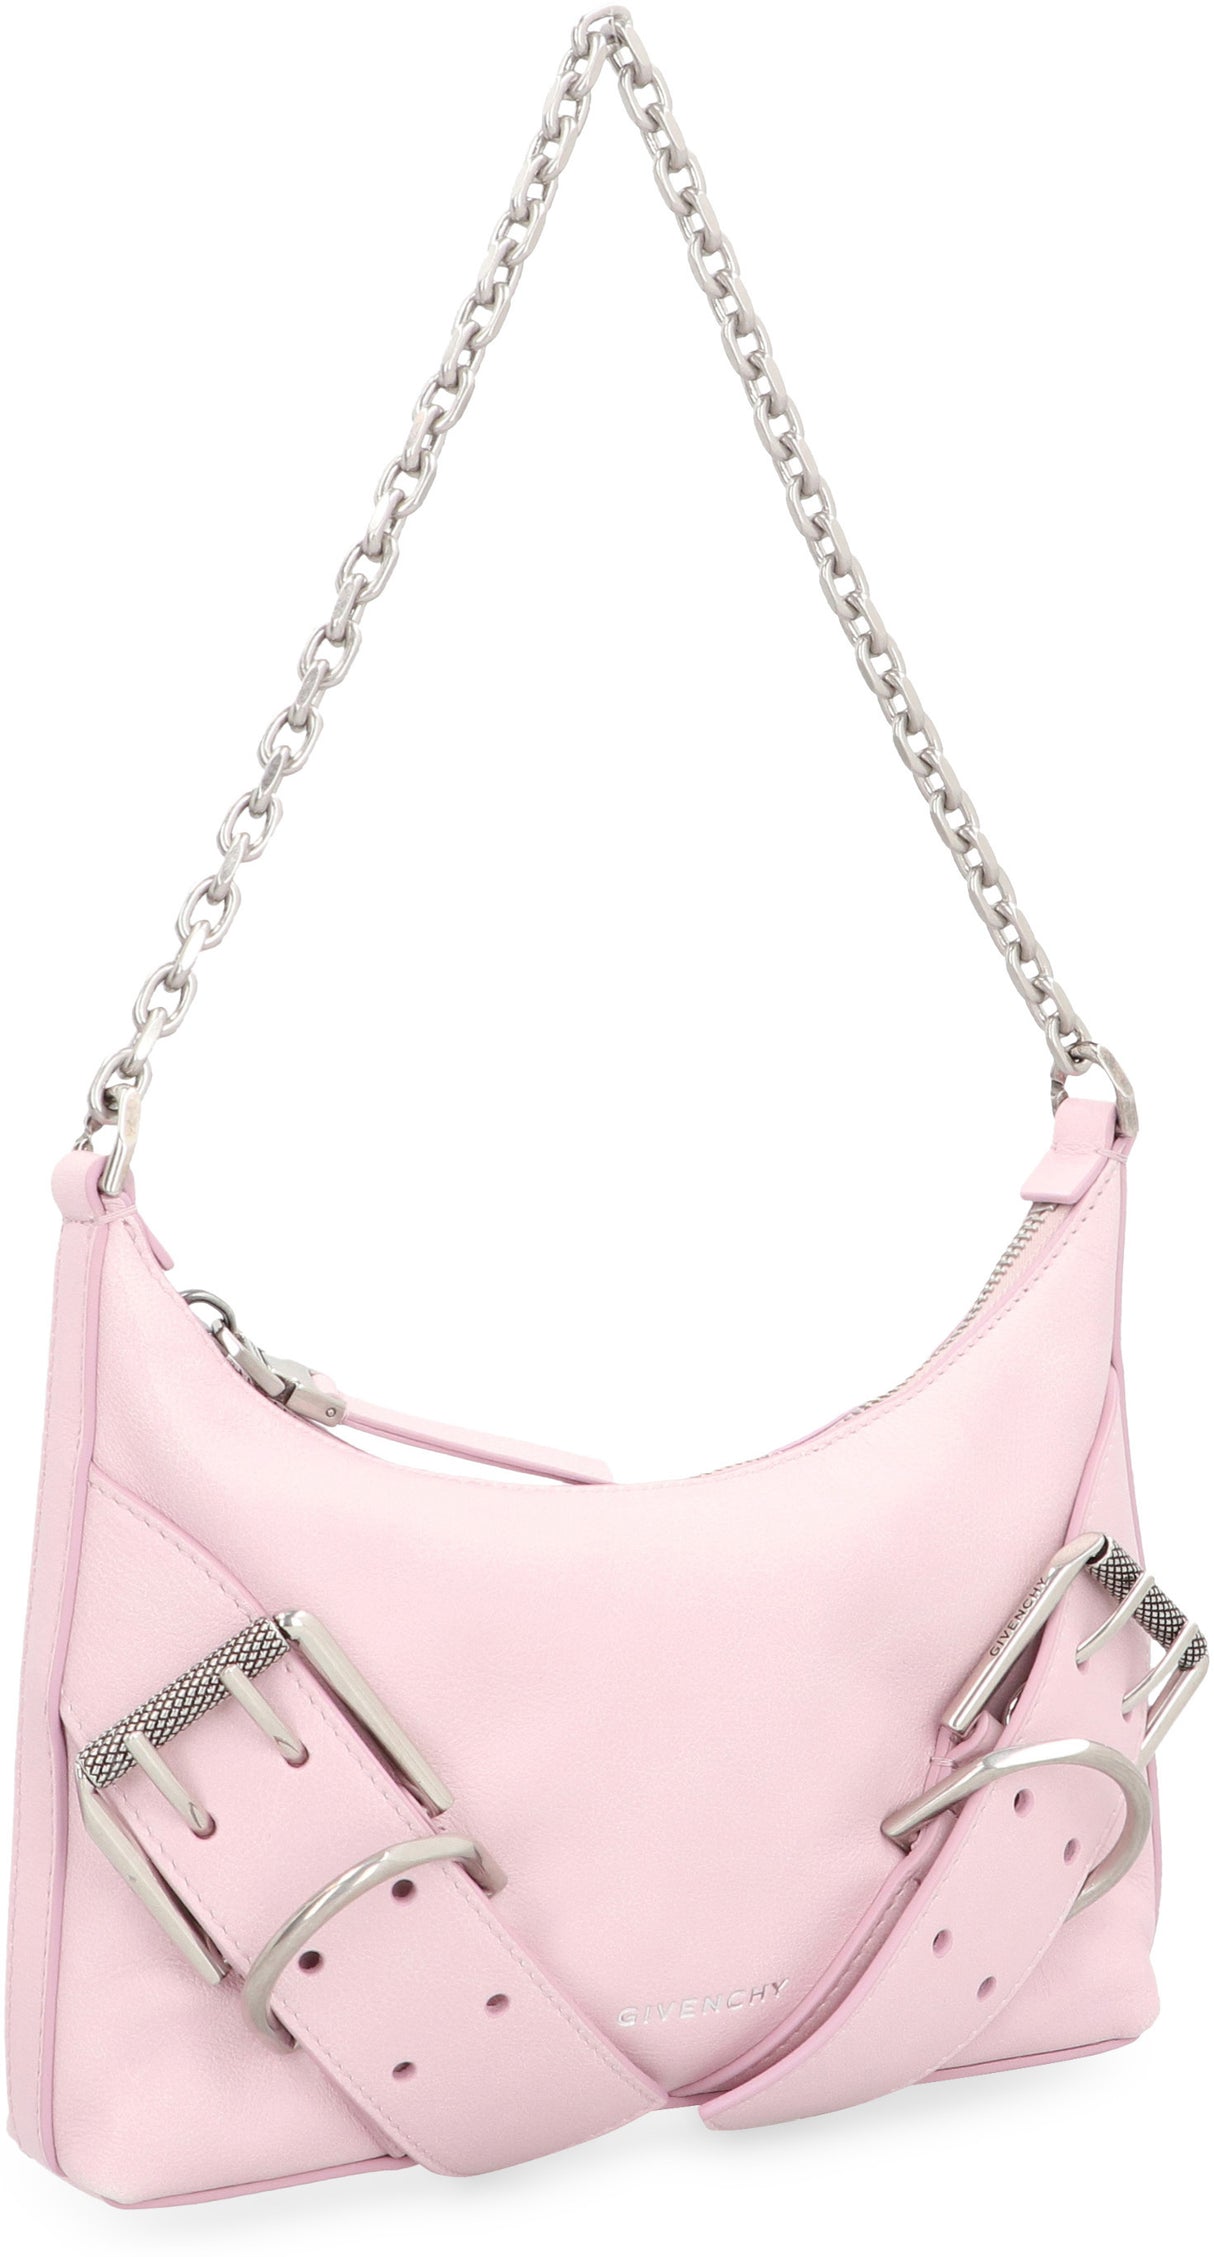 GIVENCHY Pink Leather Shoulder Handbag with Decorative Buckles and Silver-Tone Hardware